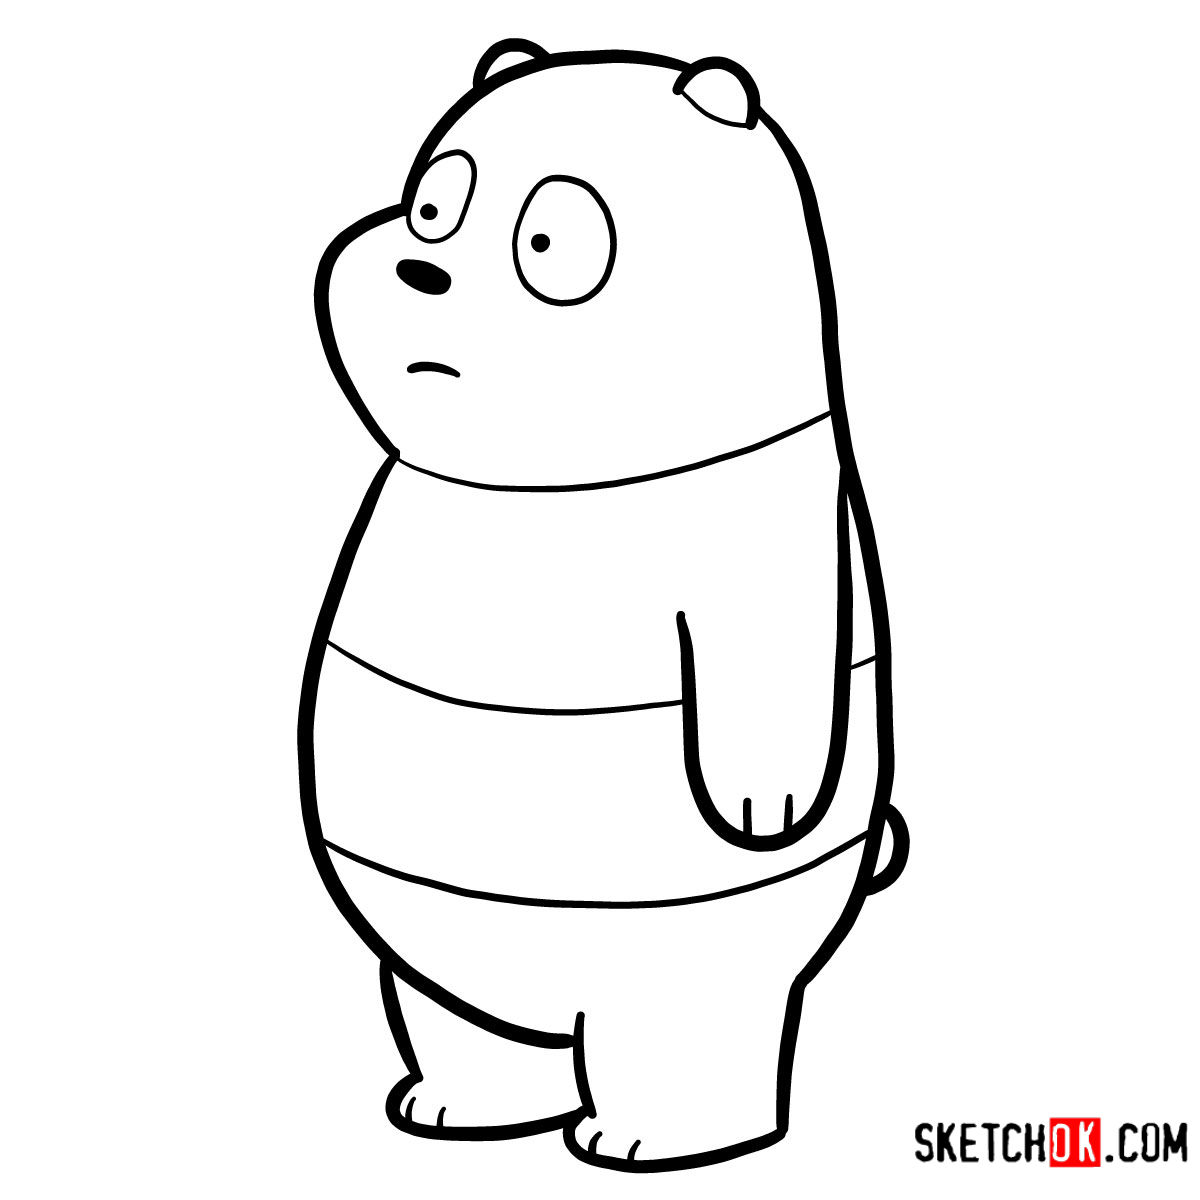 How To Draw Panda Bear We Bare Bears Sketchok Easy Drawing Guides